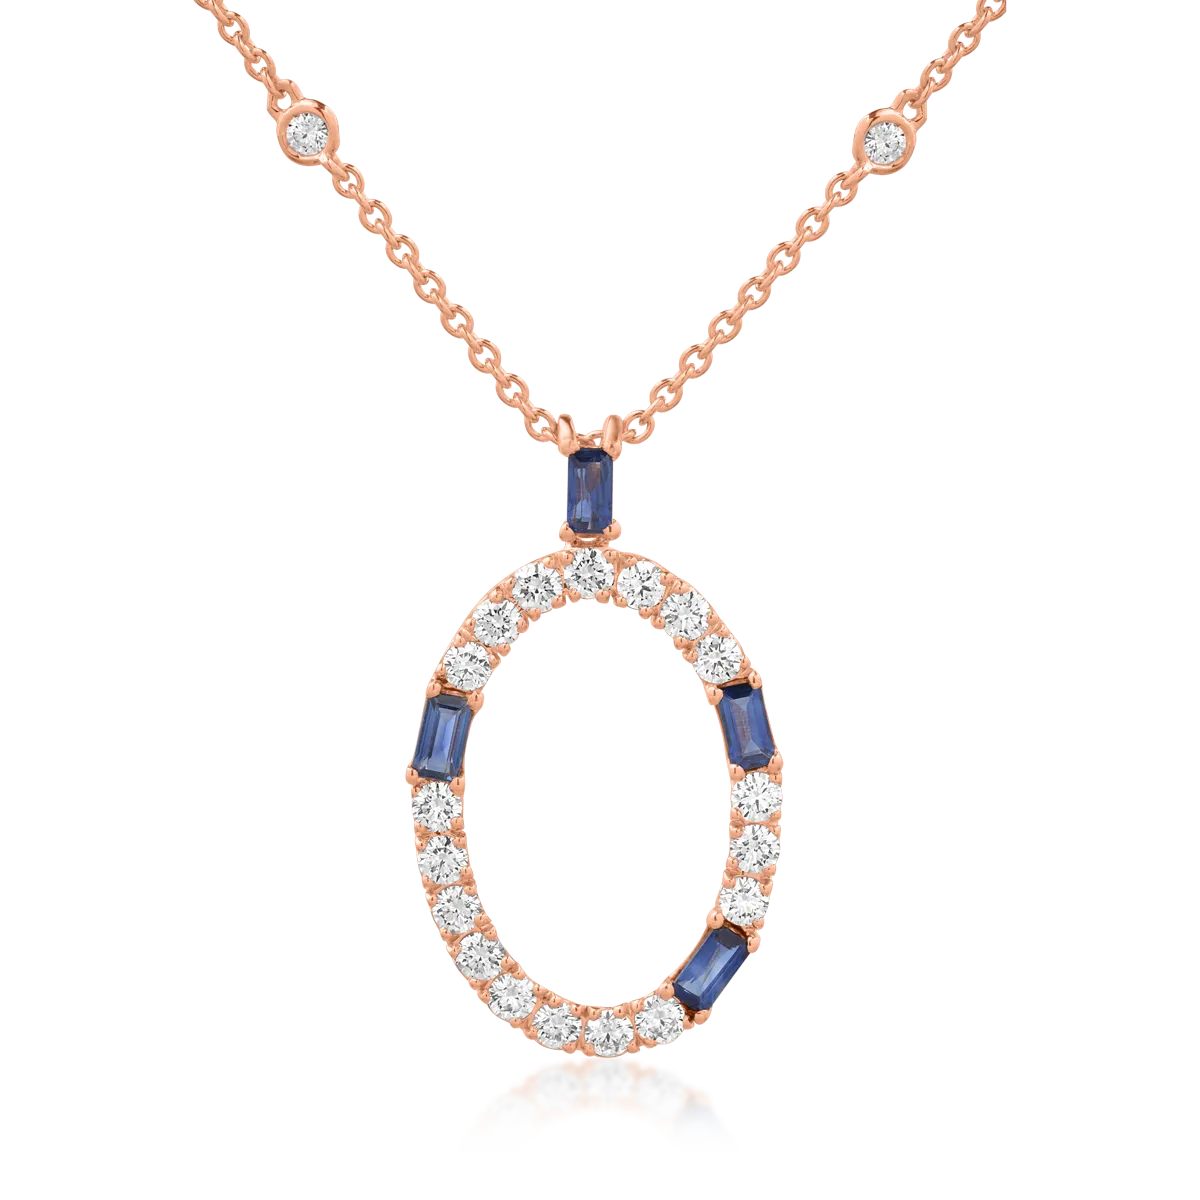 18K rose gold geometric shape pendant necklace with 0.67ct sapphires and 0.95ct diamonds